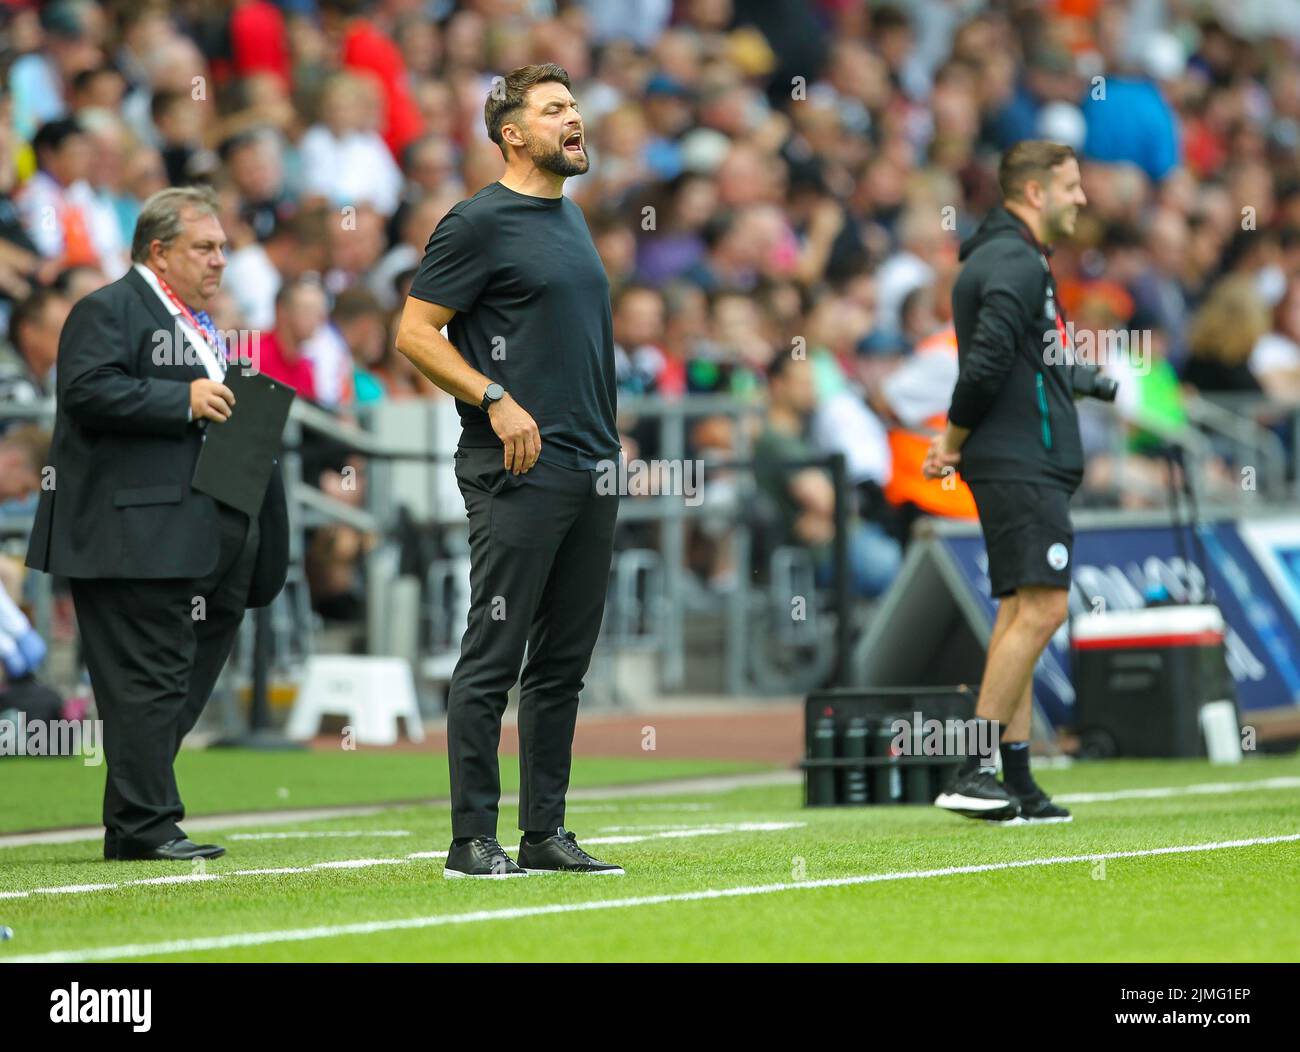 6th August 2022; Swansea.com stadium, Swansea, Wales; Championship football, Swansea versus Blackburn: Russell Martin manager of Swansea City shouts instructions to his players Stock Photo